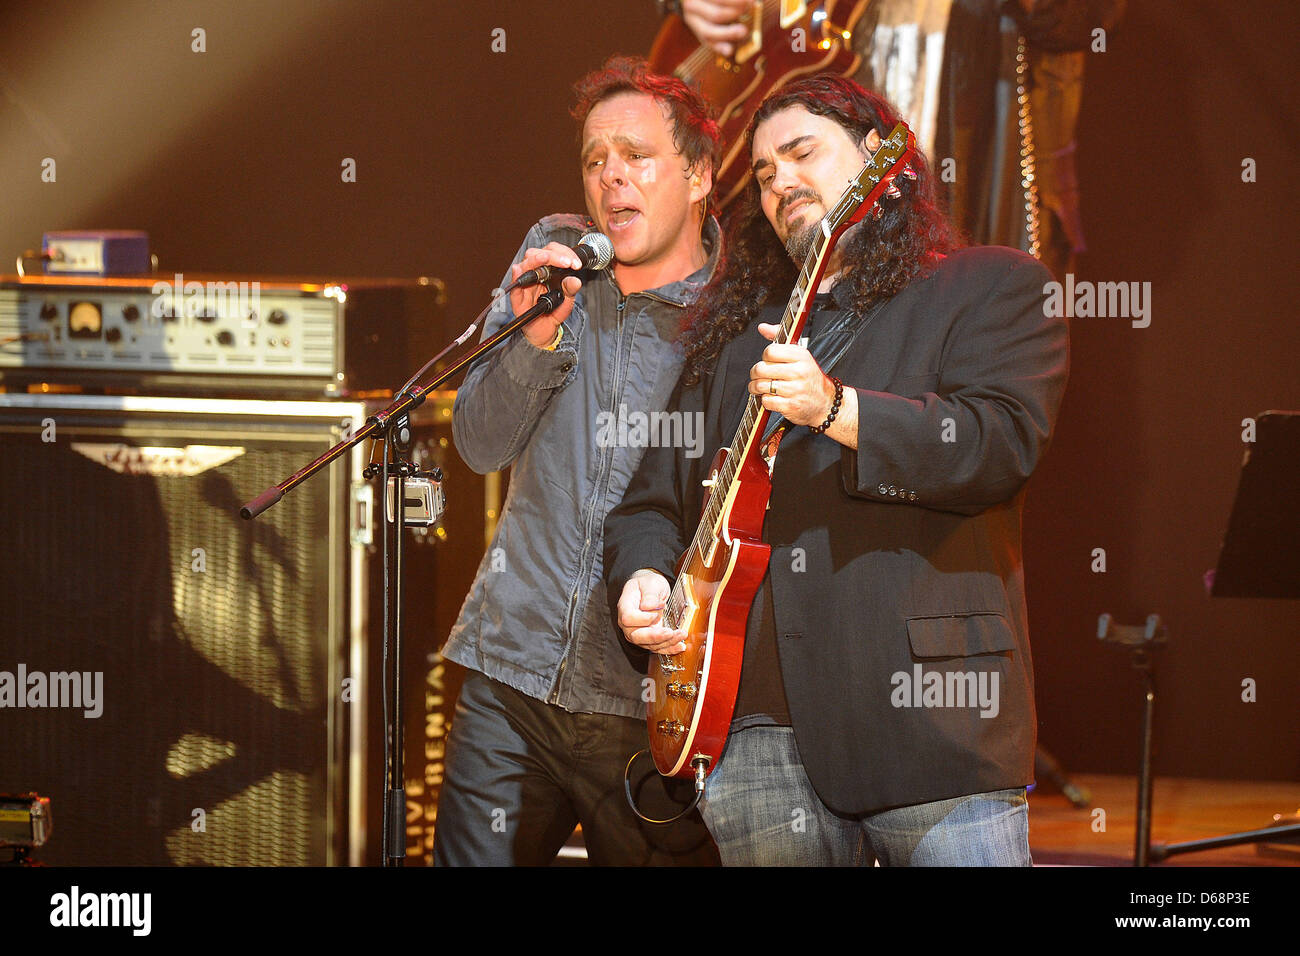 Leadsinger Paul Josef Olsson (L) and guitarist Alastair Greene perform on stage during The Alan Parsons Live Project tour 2012 at Circus Krone in Munich, Germany, 19 July 2012. Photo: Revierfoto Stock Photo